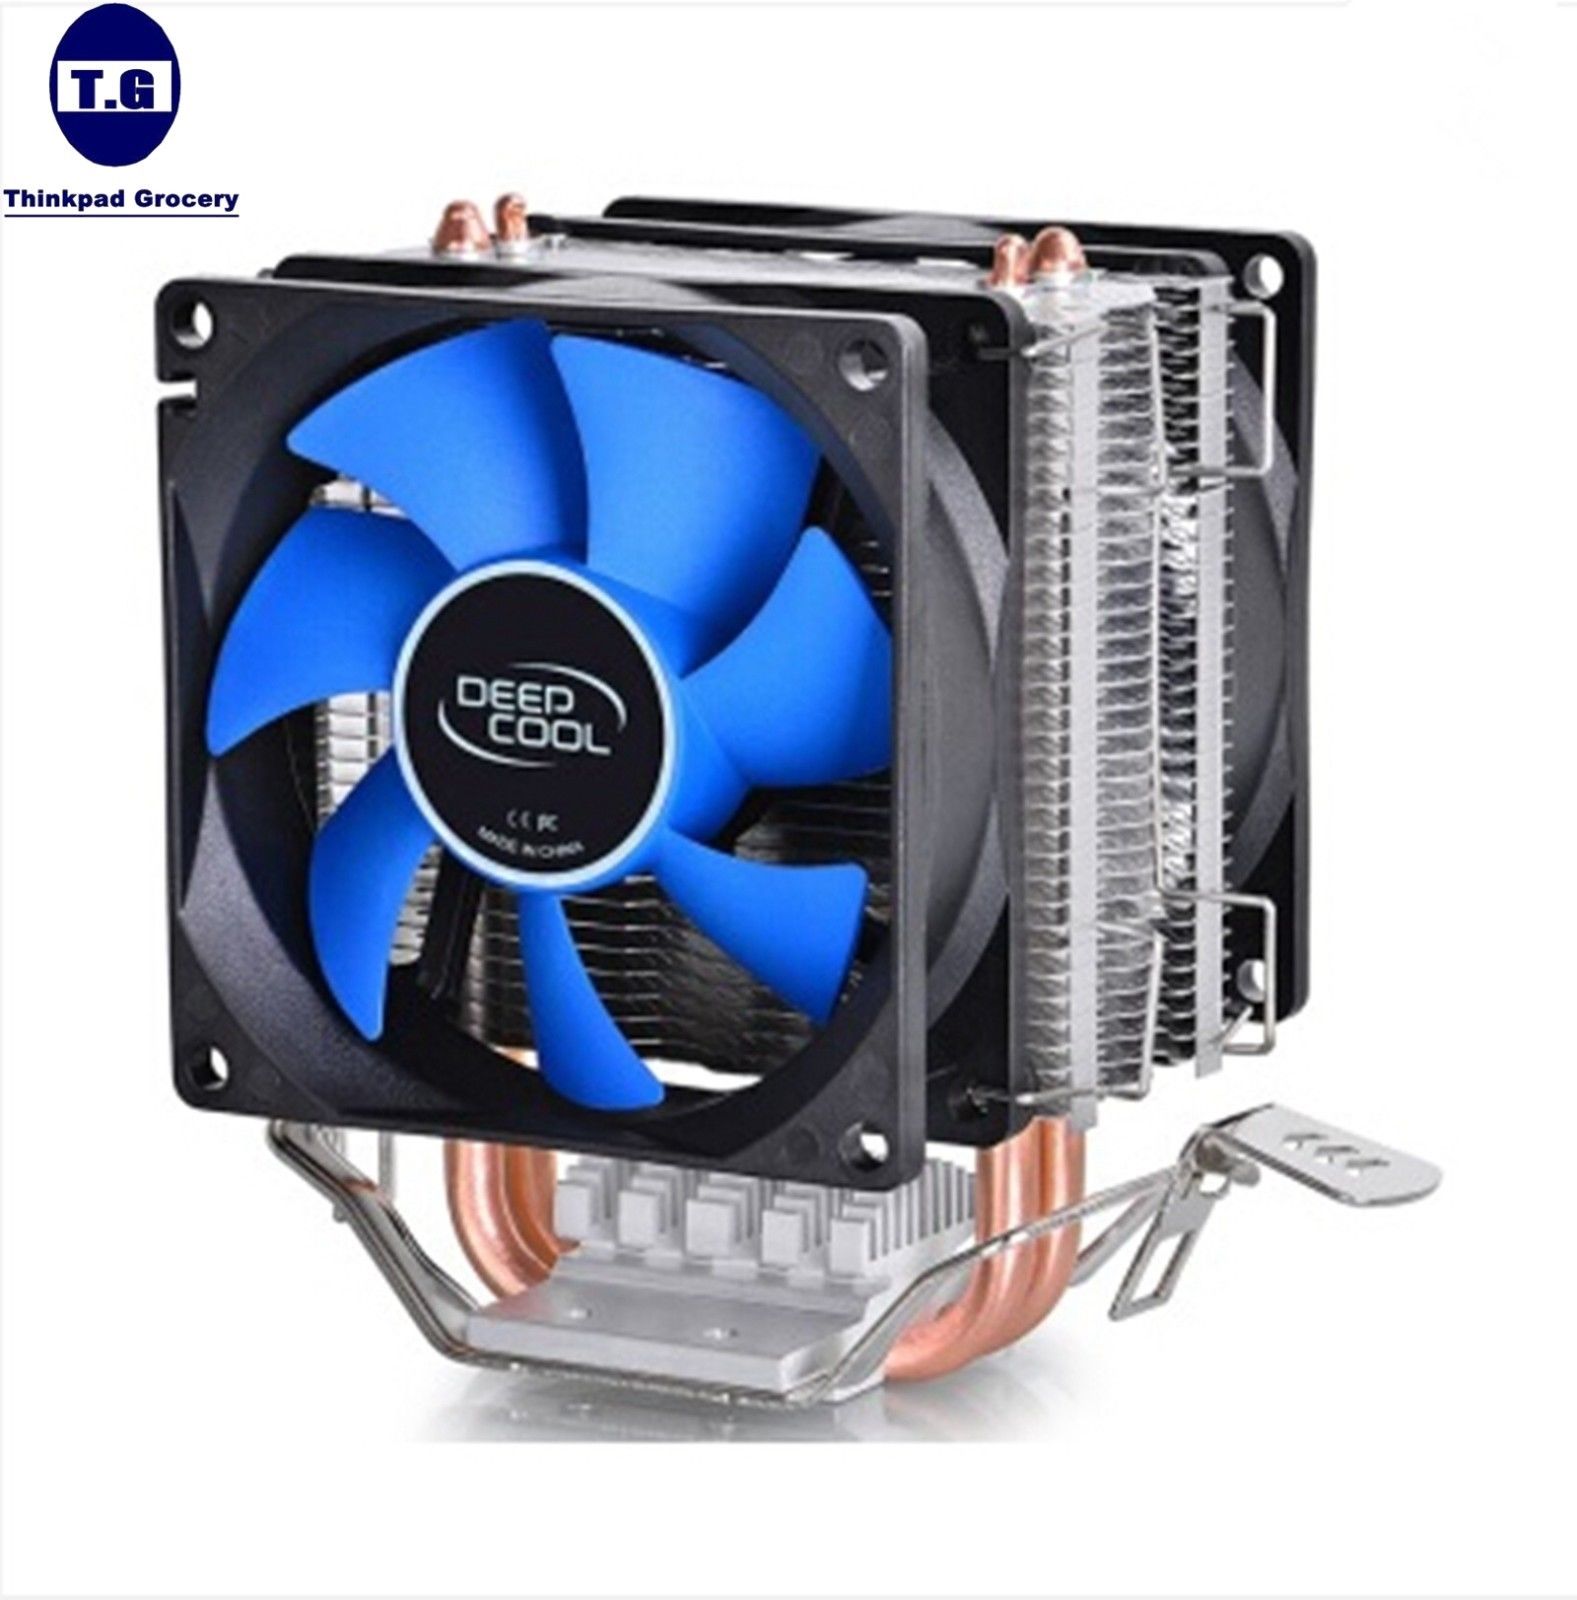 New Dual CPU Cooling fan with heatsink for AMD AM2+AM3+FM1 FM2 LGA 1156775 - Click Image to Close